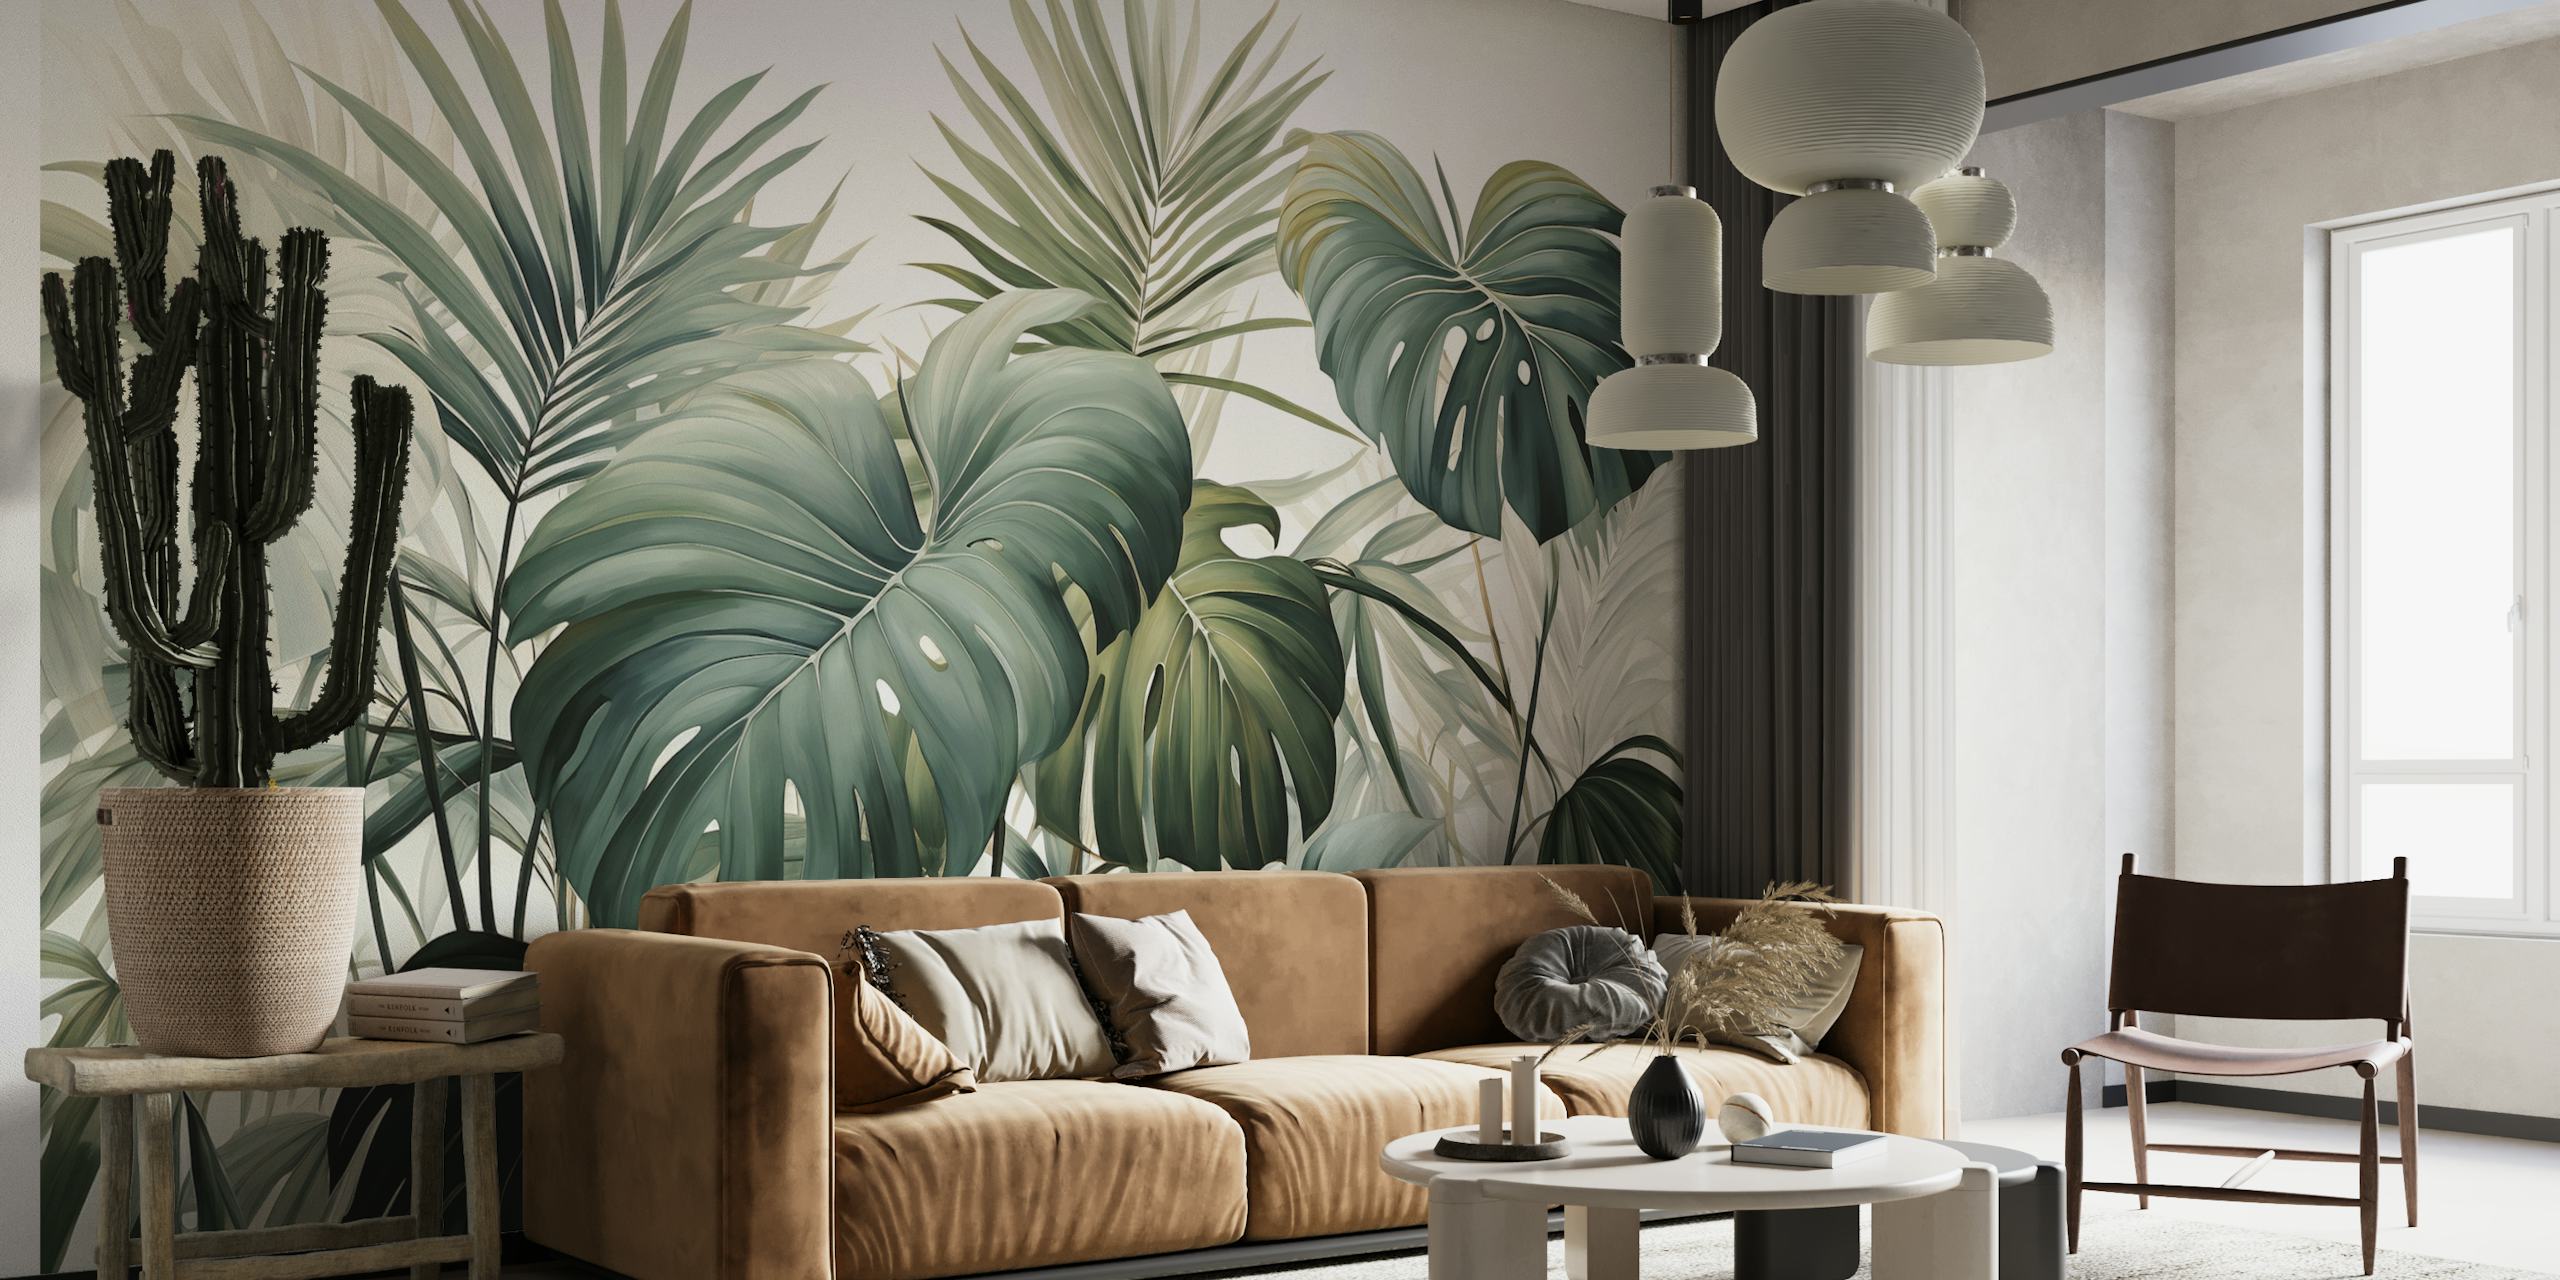 Tropical leaf pattern wall mural from happywall.com